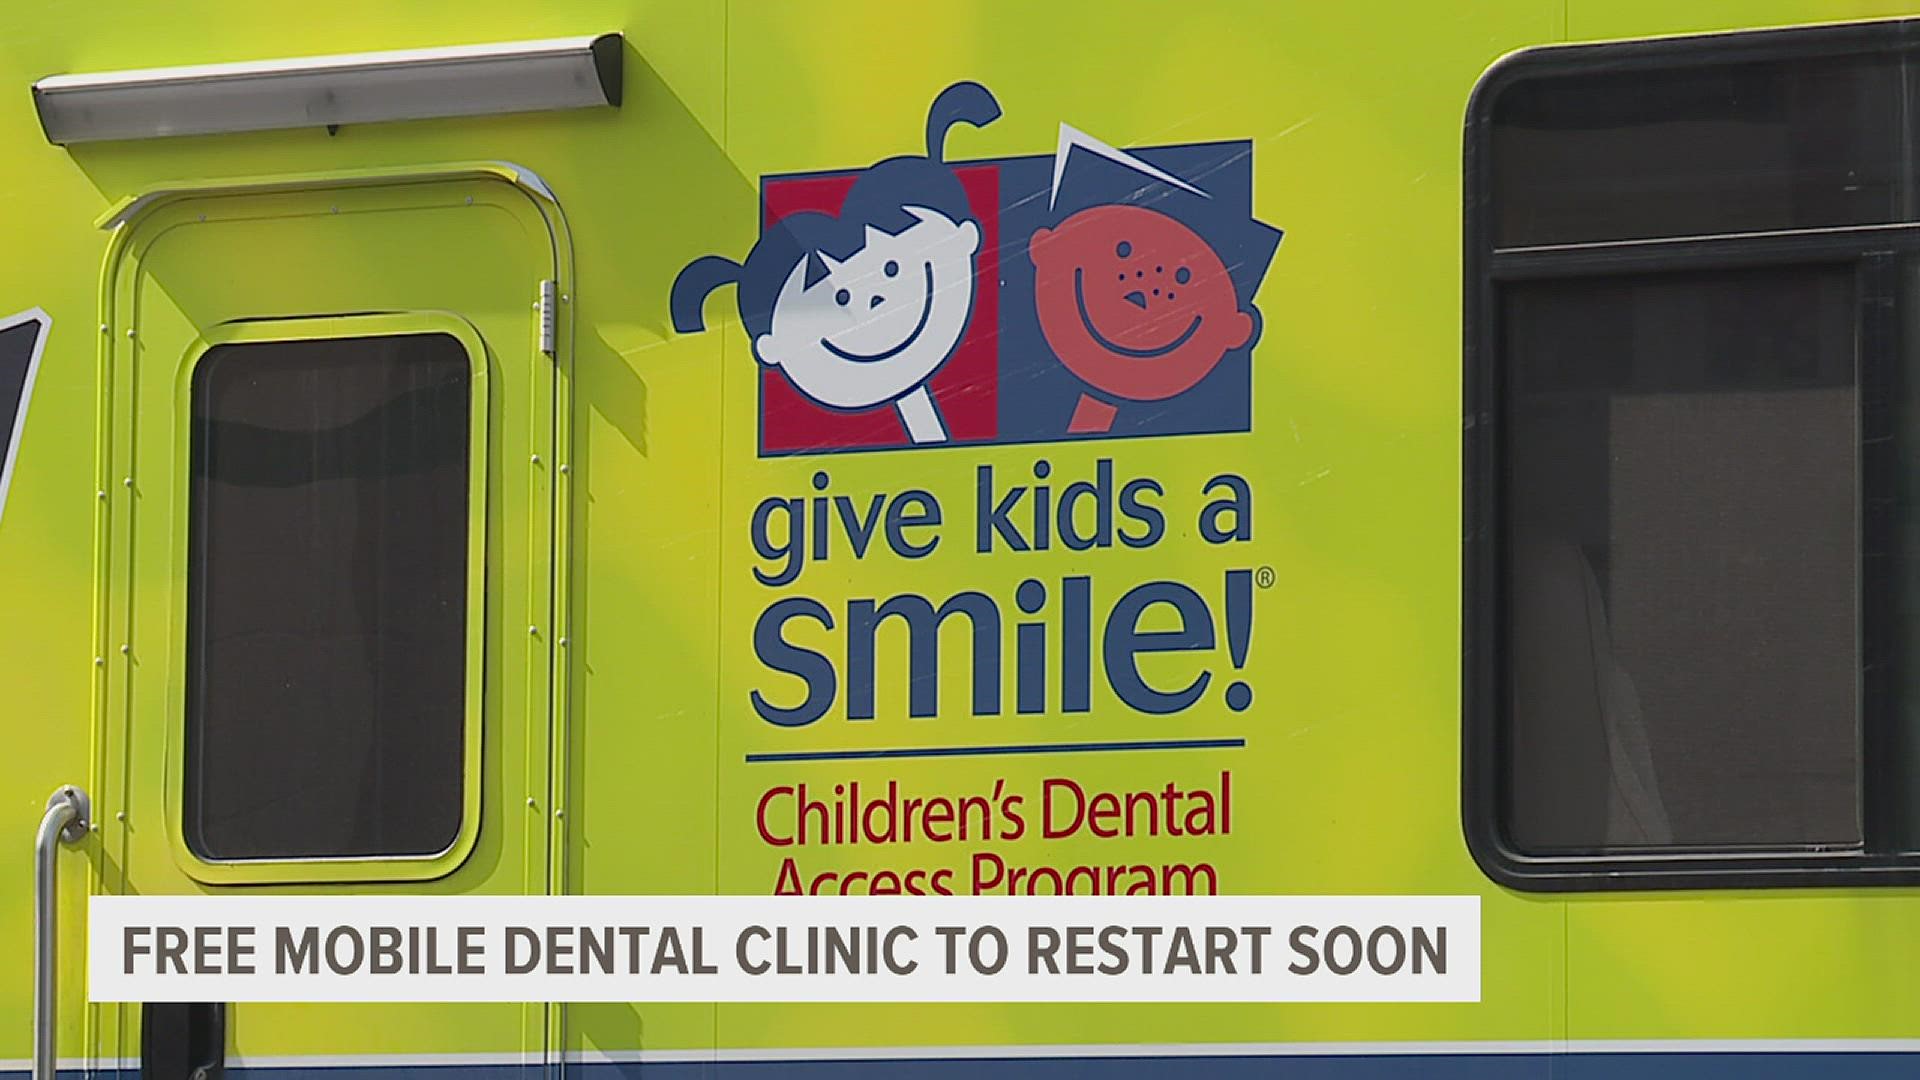 The Give Kids a Smile Program is returning to the Quad Cities this fall after volunteers prepared medical kits and cleaned the bus on Thursday.